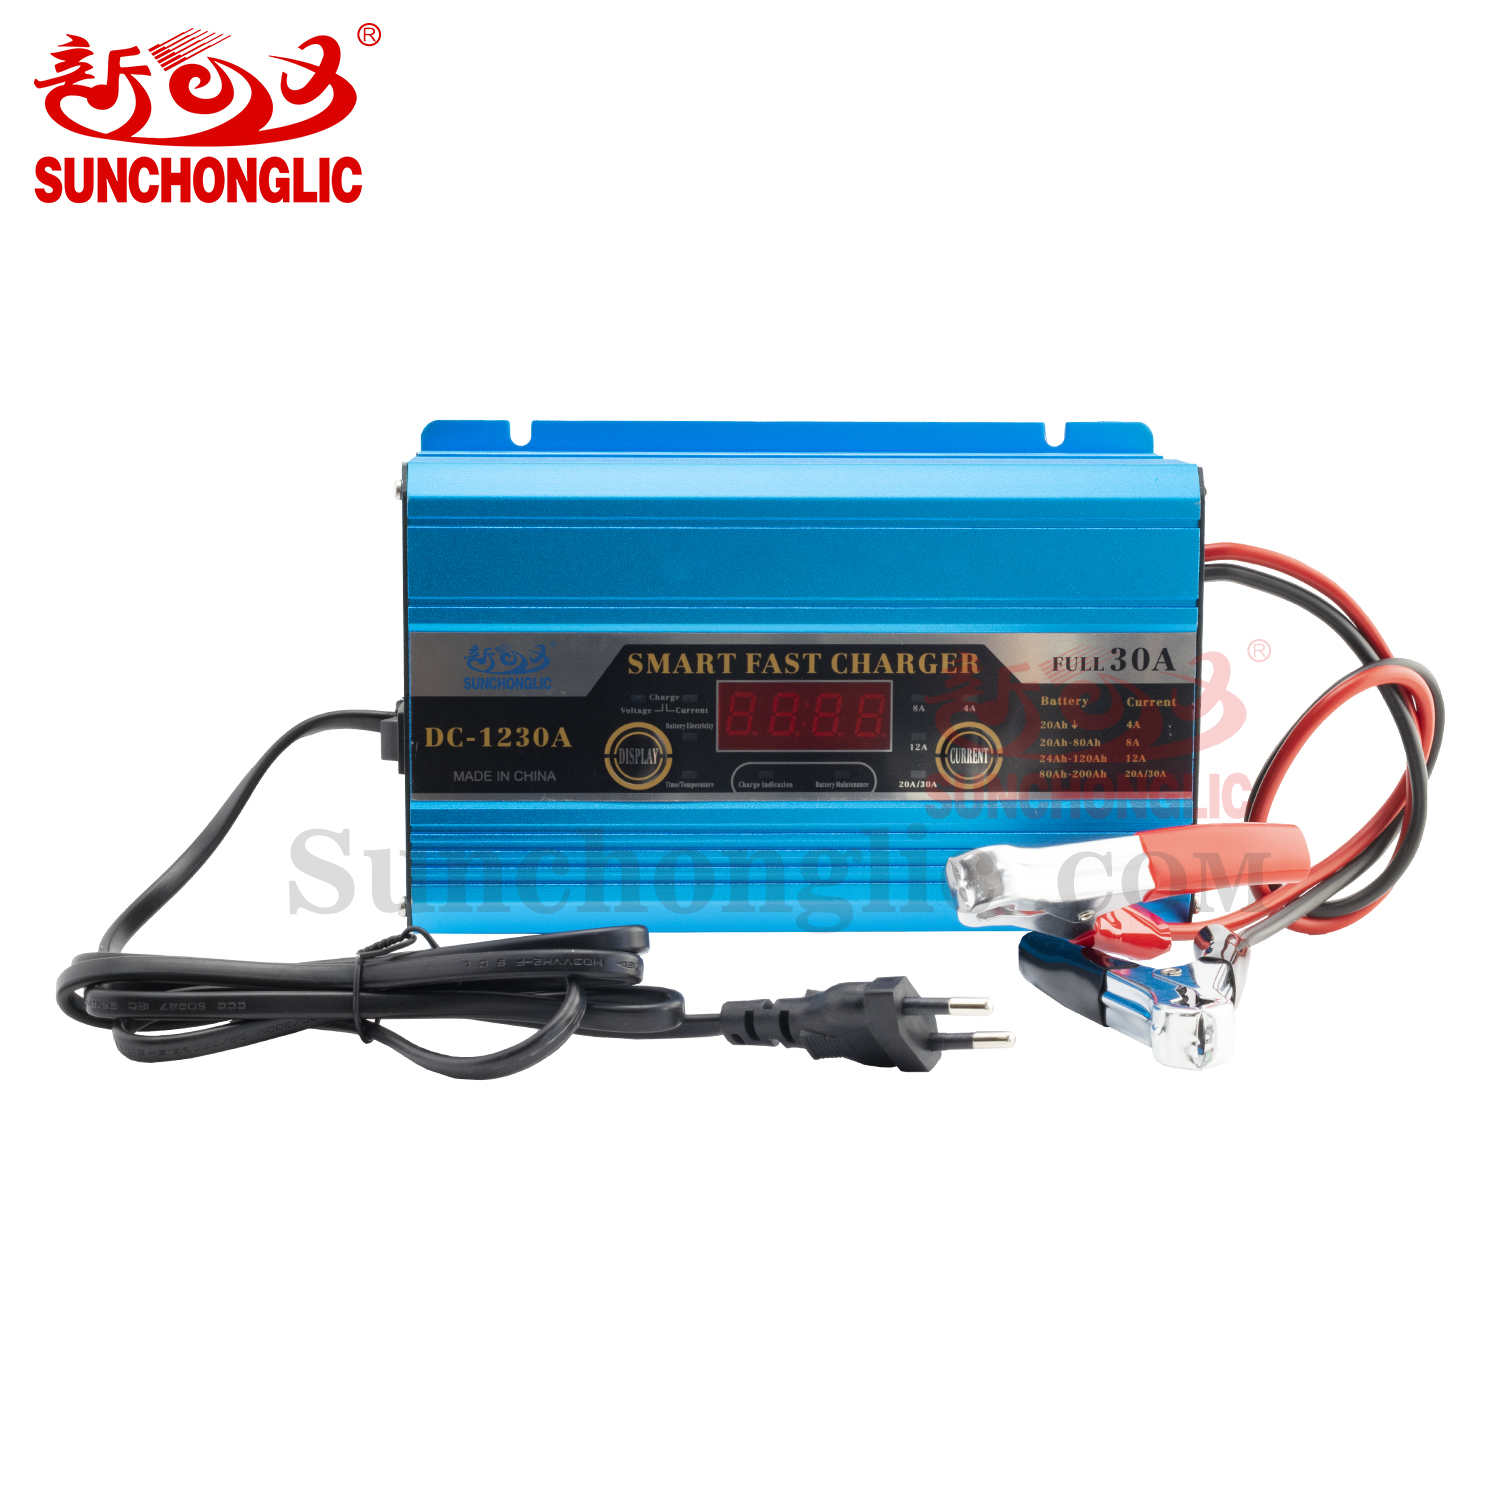 AGM/GEL Battery Charger - DC-1230A